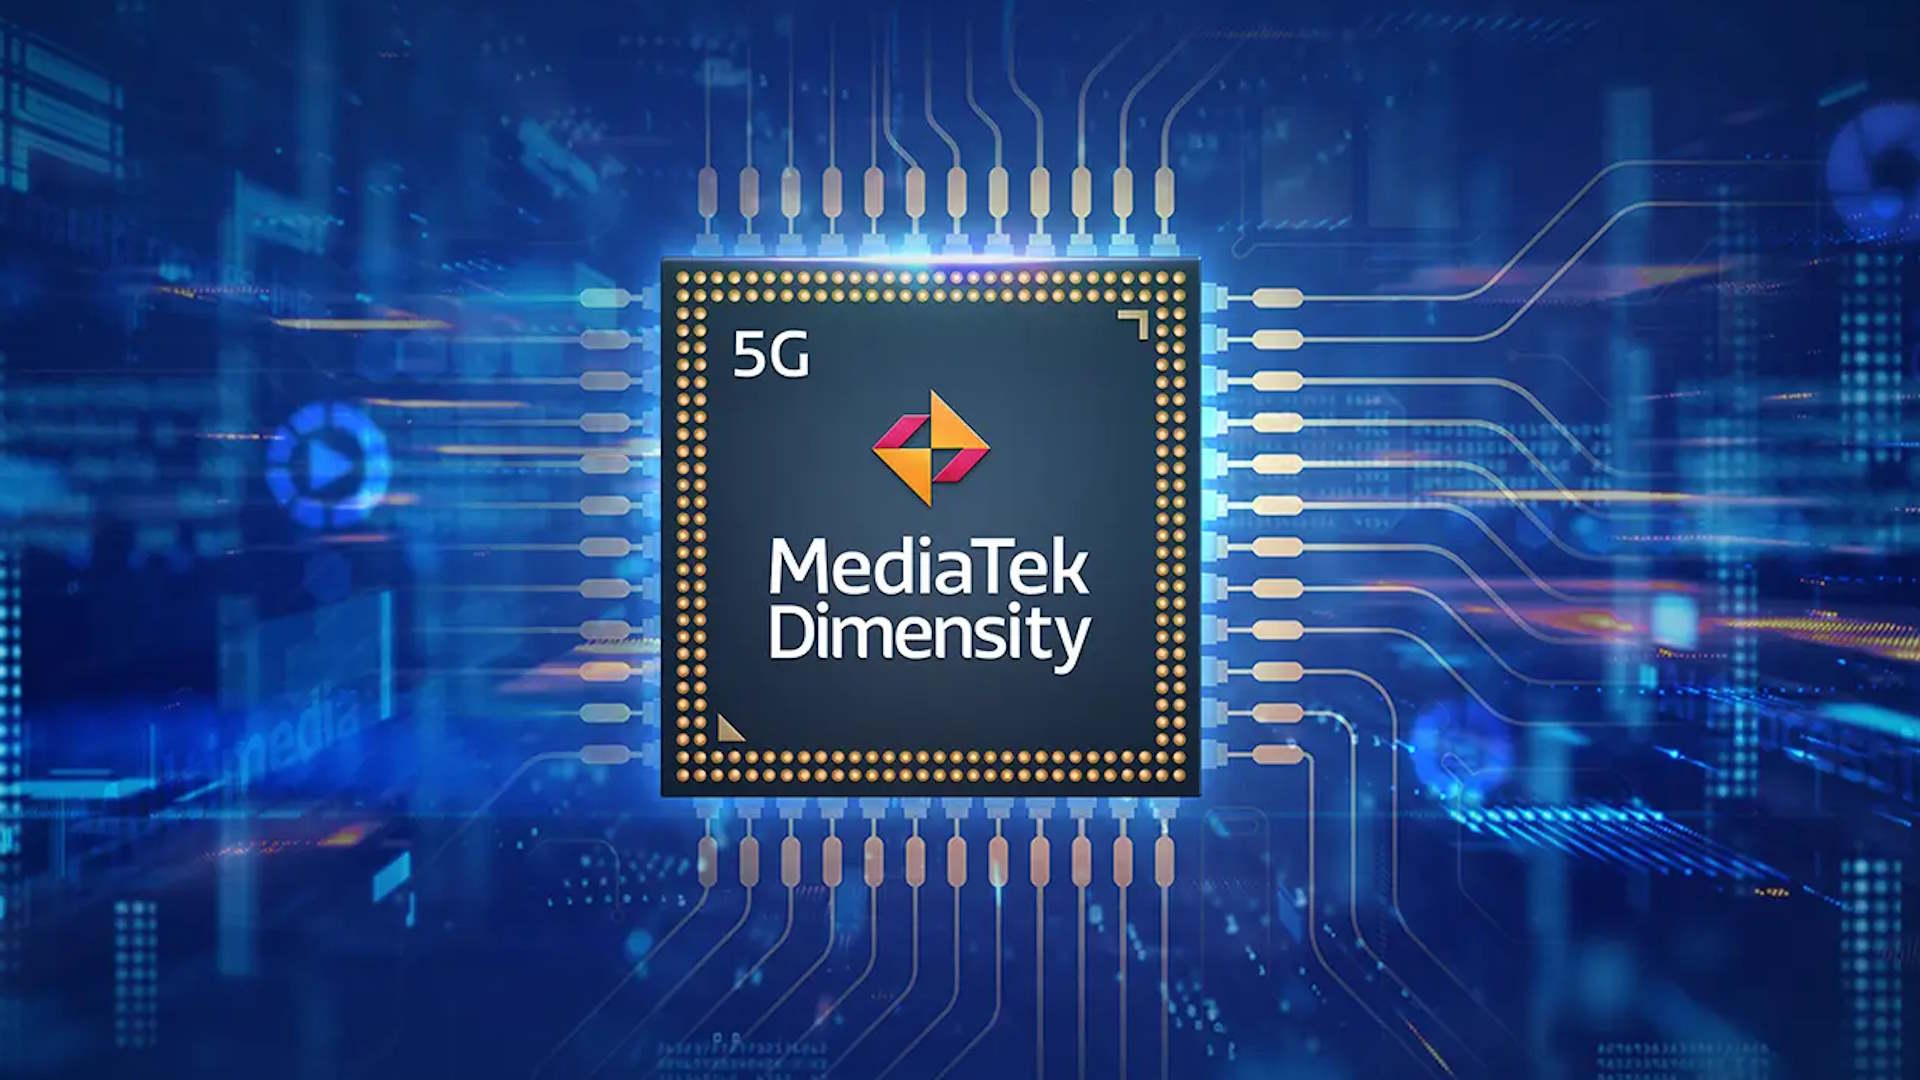 The MediaTek Dimensity 8300 chip seems to arrive straight from the 4 nm manufacturing process